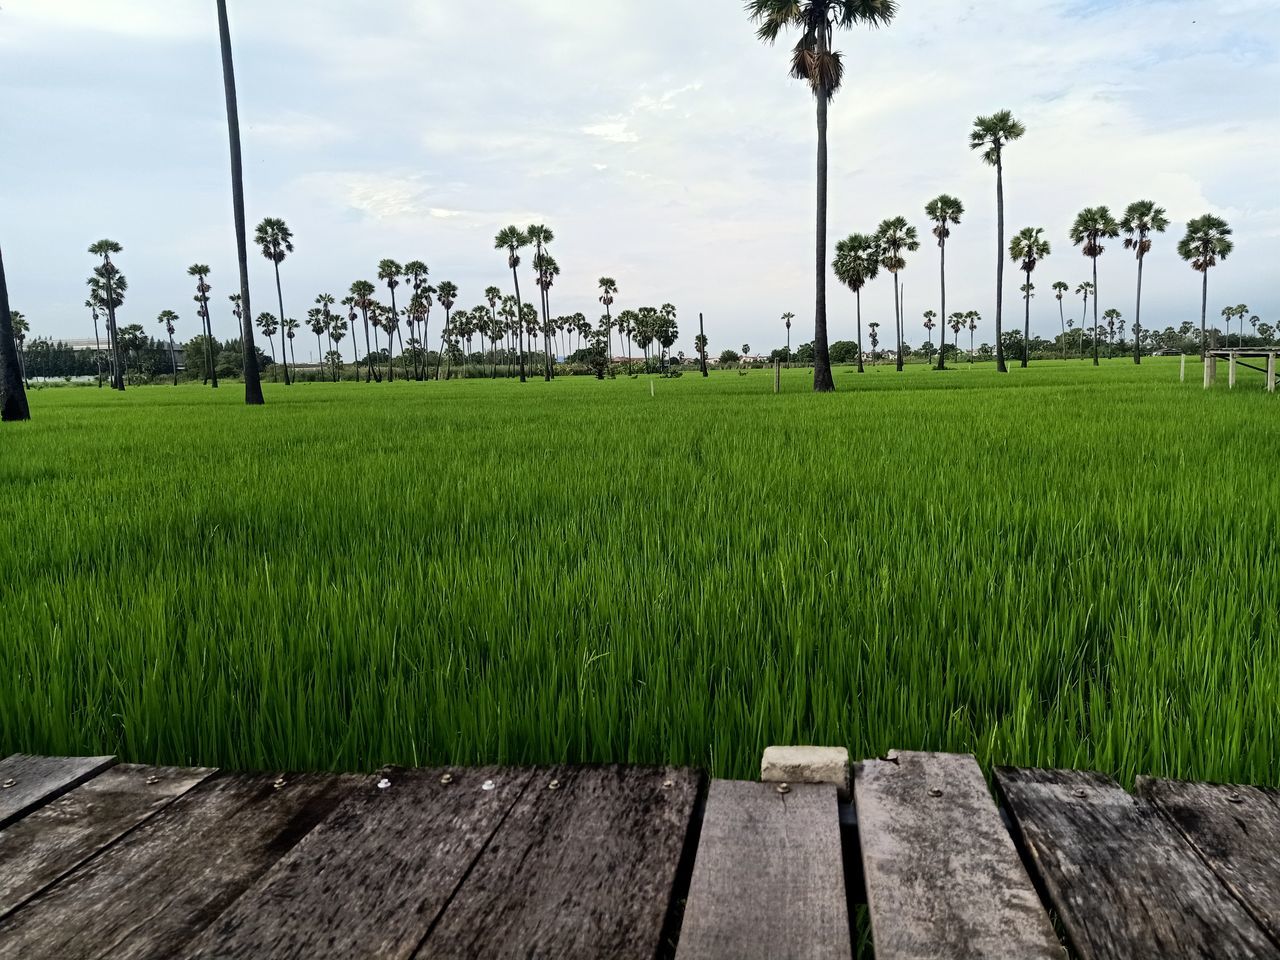 plant, paddy field, grass, agriculture, sky, field, nature, landscape, green, tree, land, cloud, rural area, rural scene, tropical climate, palm tree, environment, rice paddy, rice, growth, crop, beauty in nature, outdoors, no people, farm, day, scenics - nature, tranquility, wheatgrass, wood, lawn, horizon, water, cereal plant, tranquil scene, food and drink